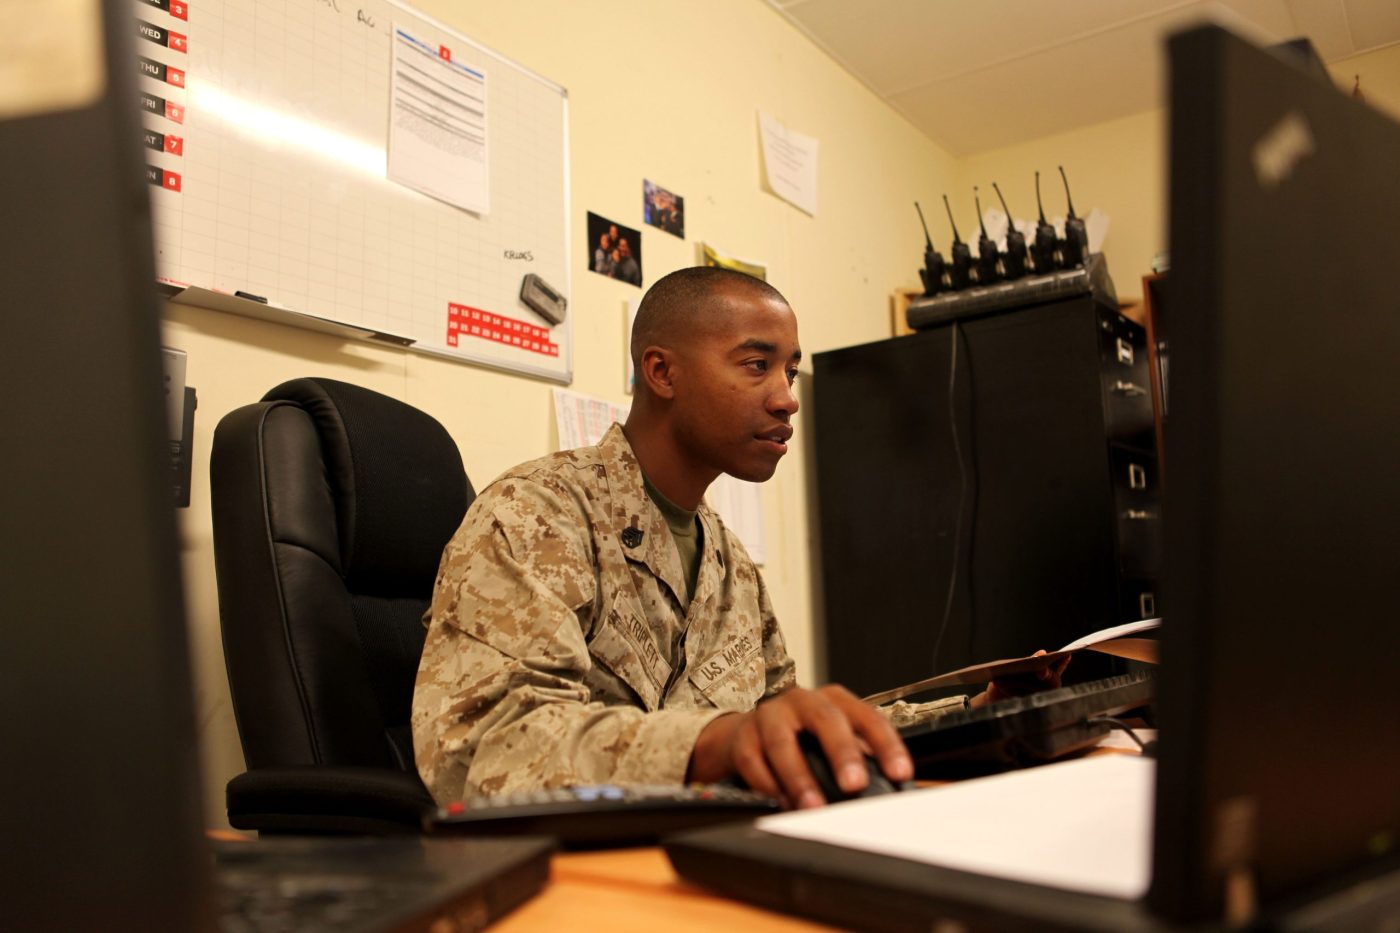 Starting April 1st, transitioning service members applying for compensation in BDD or IDES will be required to submit Part A Self-Assessment with application.